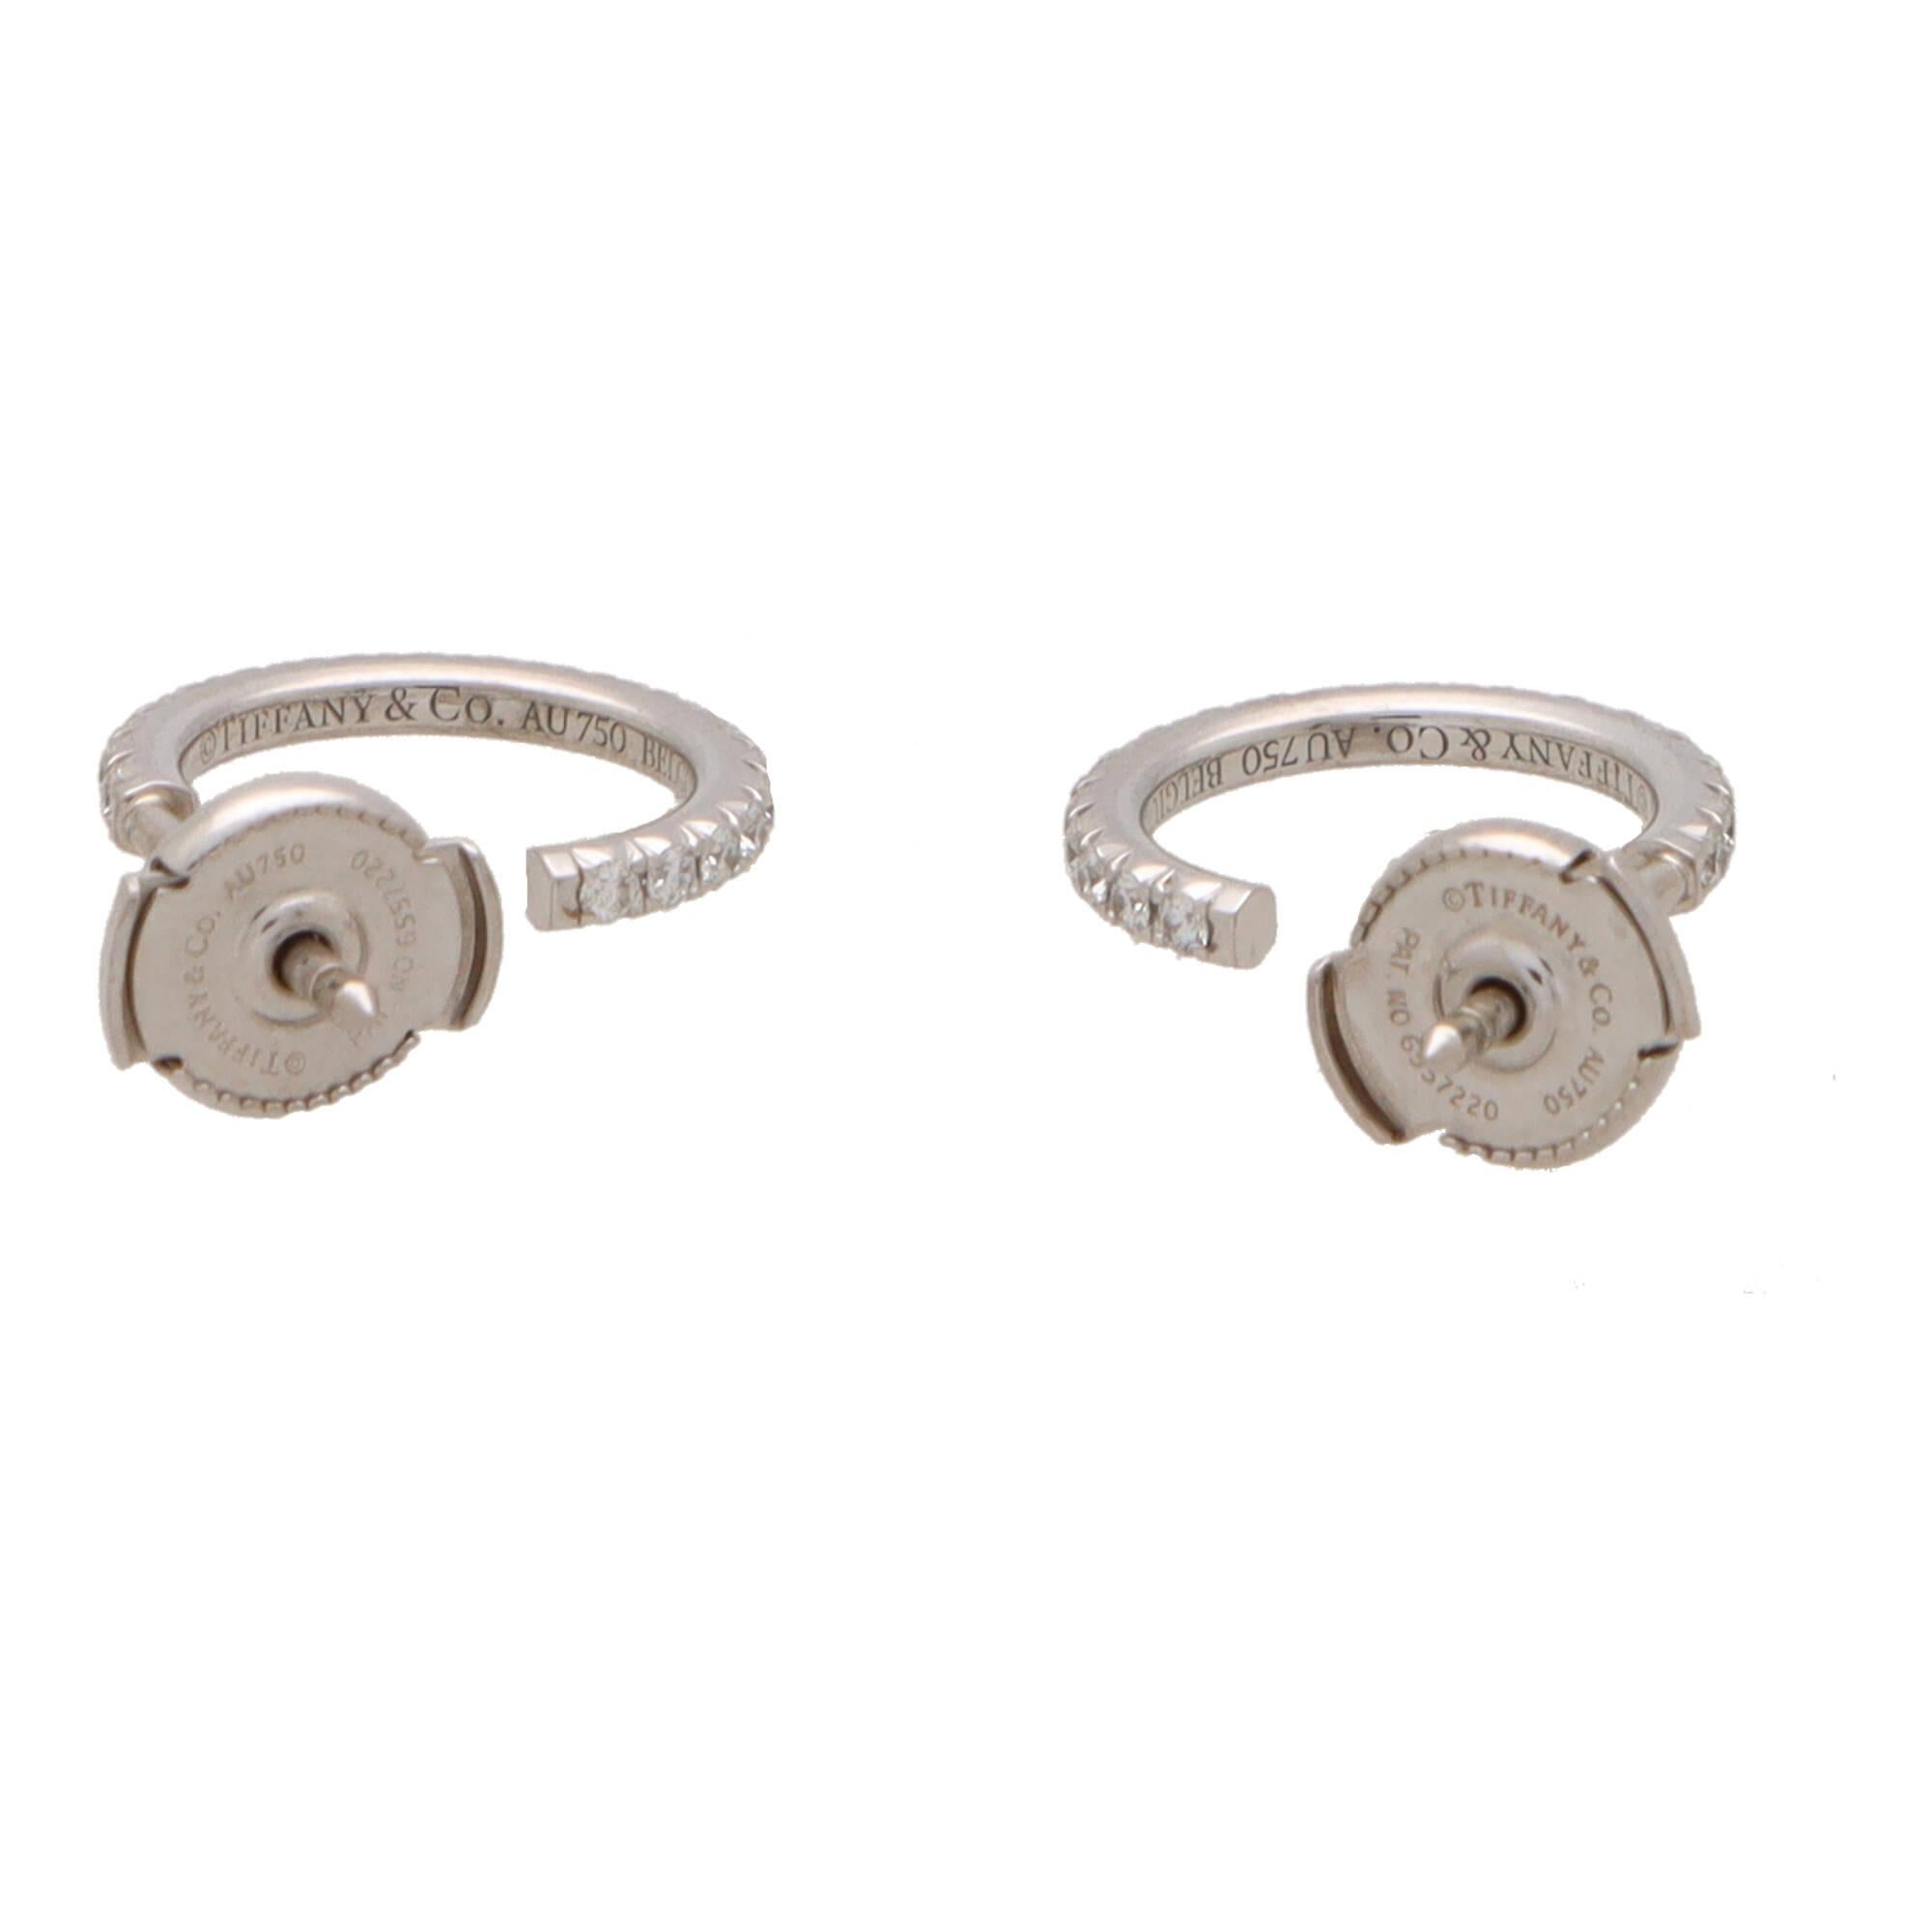 A stylish pair of vintage Tiffany & Co. ‘Tiffany Metro’ diamond hoop earrings set in 18k white gold.

From the current Tiffany Metro collection, each earring is composed of an elegant claw set hoop, set throughout with 19 round brilliant cut